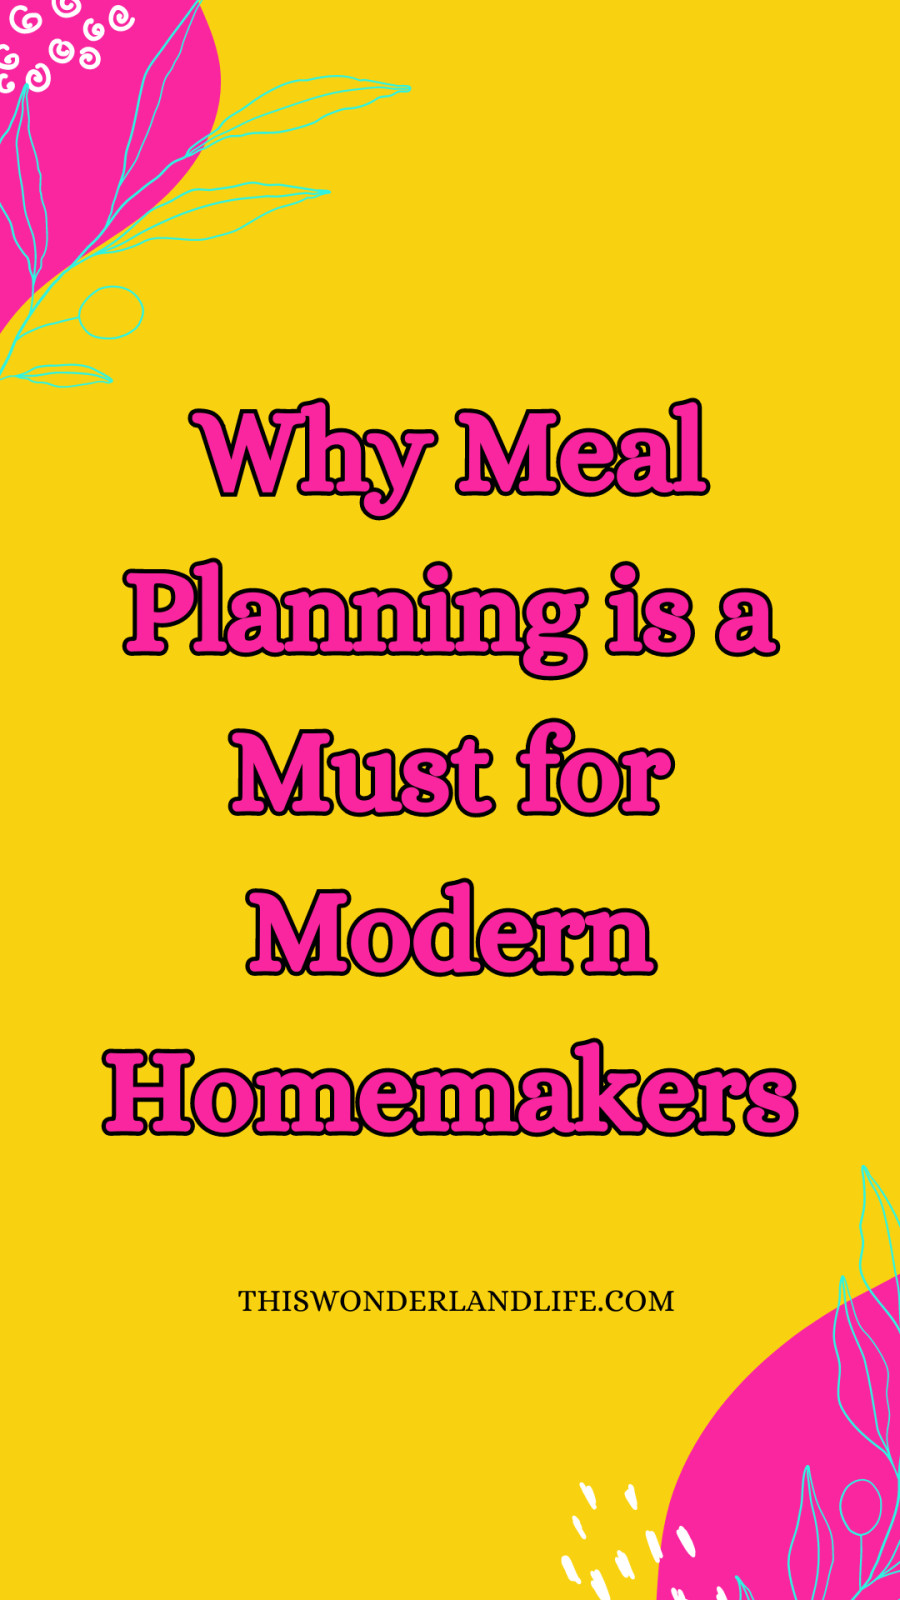 Why Meal Planning is a Must for Modern Homemakers